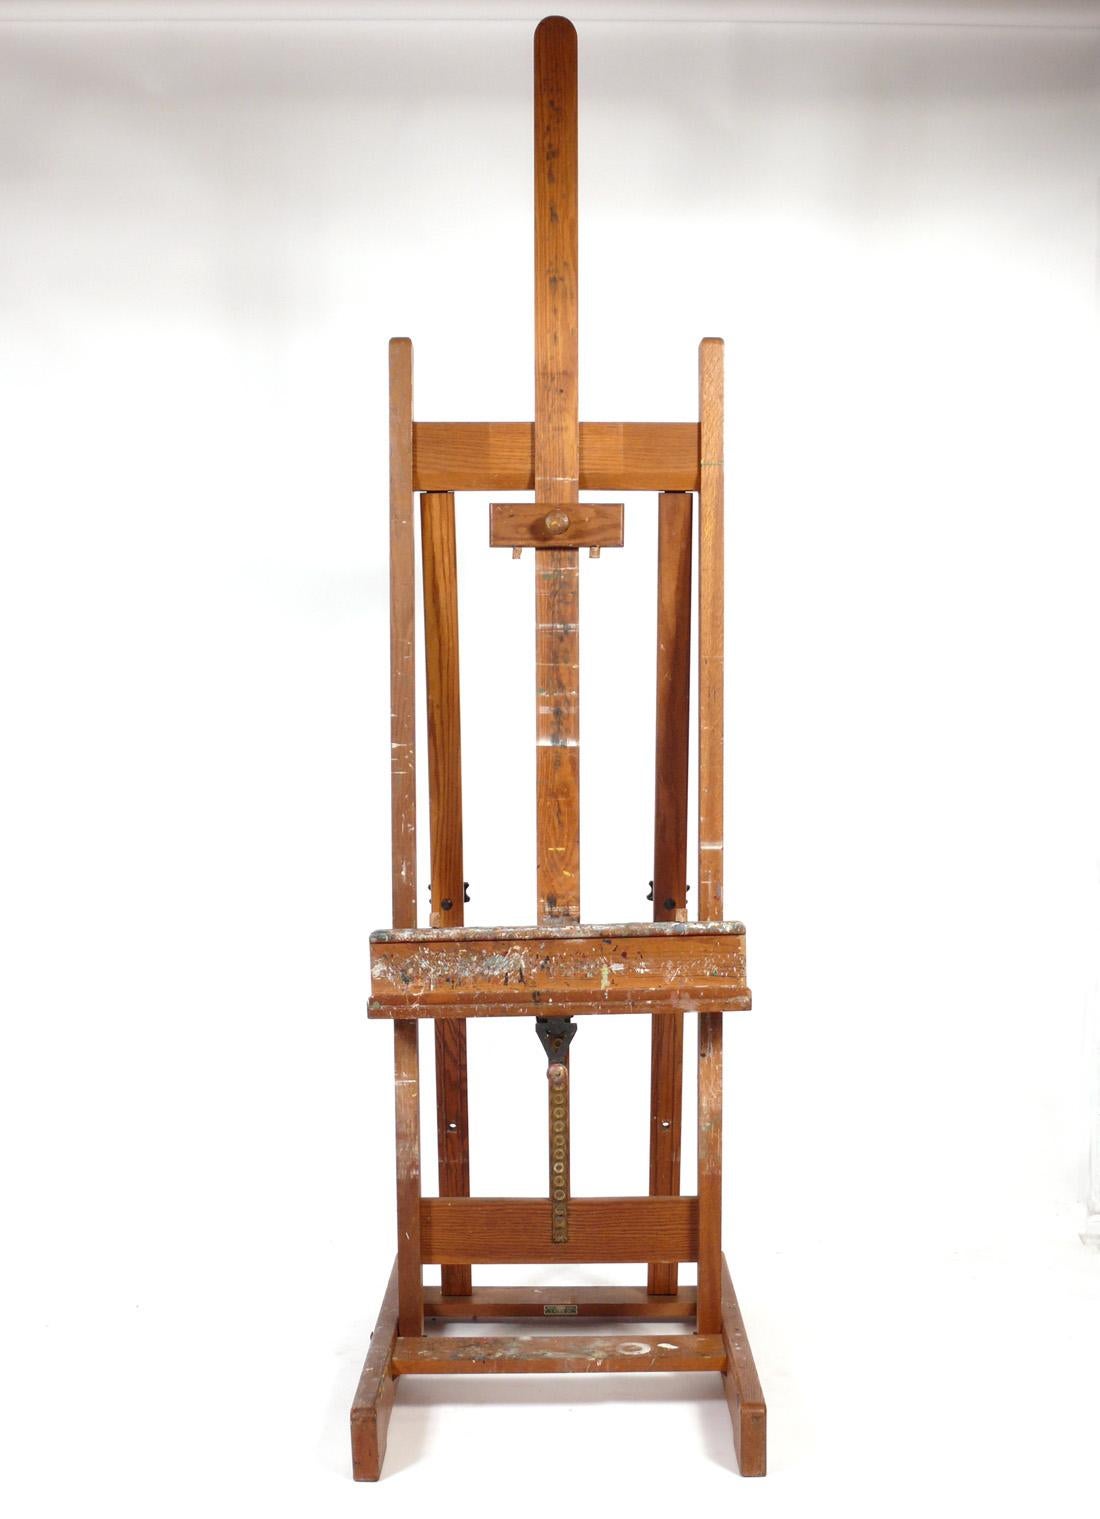 Paint Covered Artist's Easel by Weber, American, circa 1950s. This piece retains it's wonderful original paint covered patina. It can be used to hold a large painting or as a flat screen TV stand.